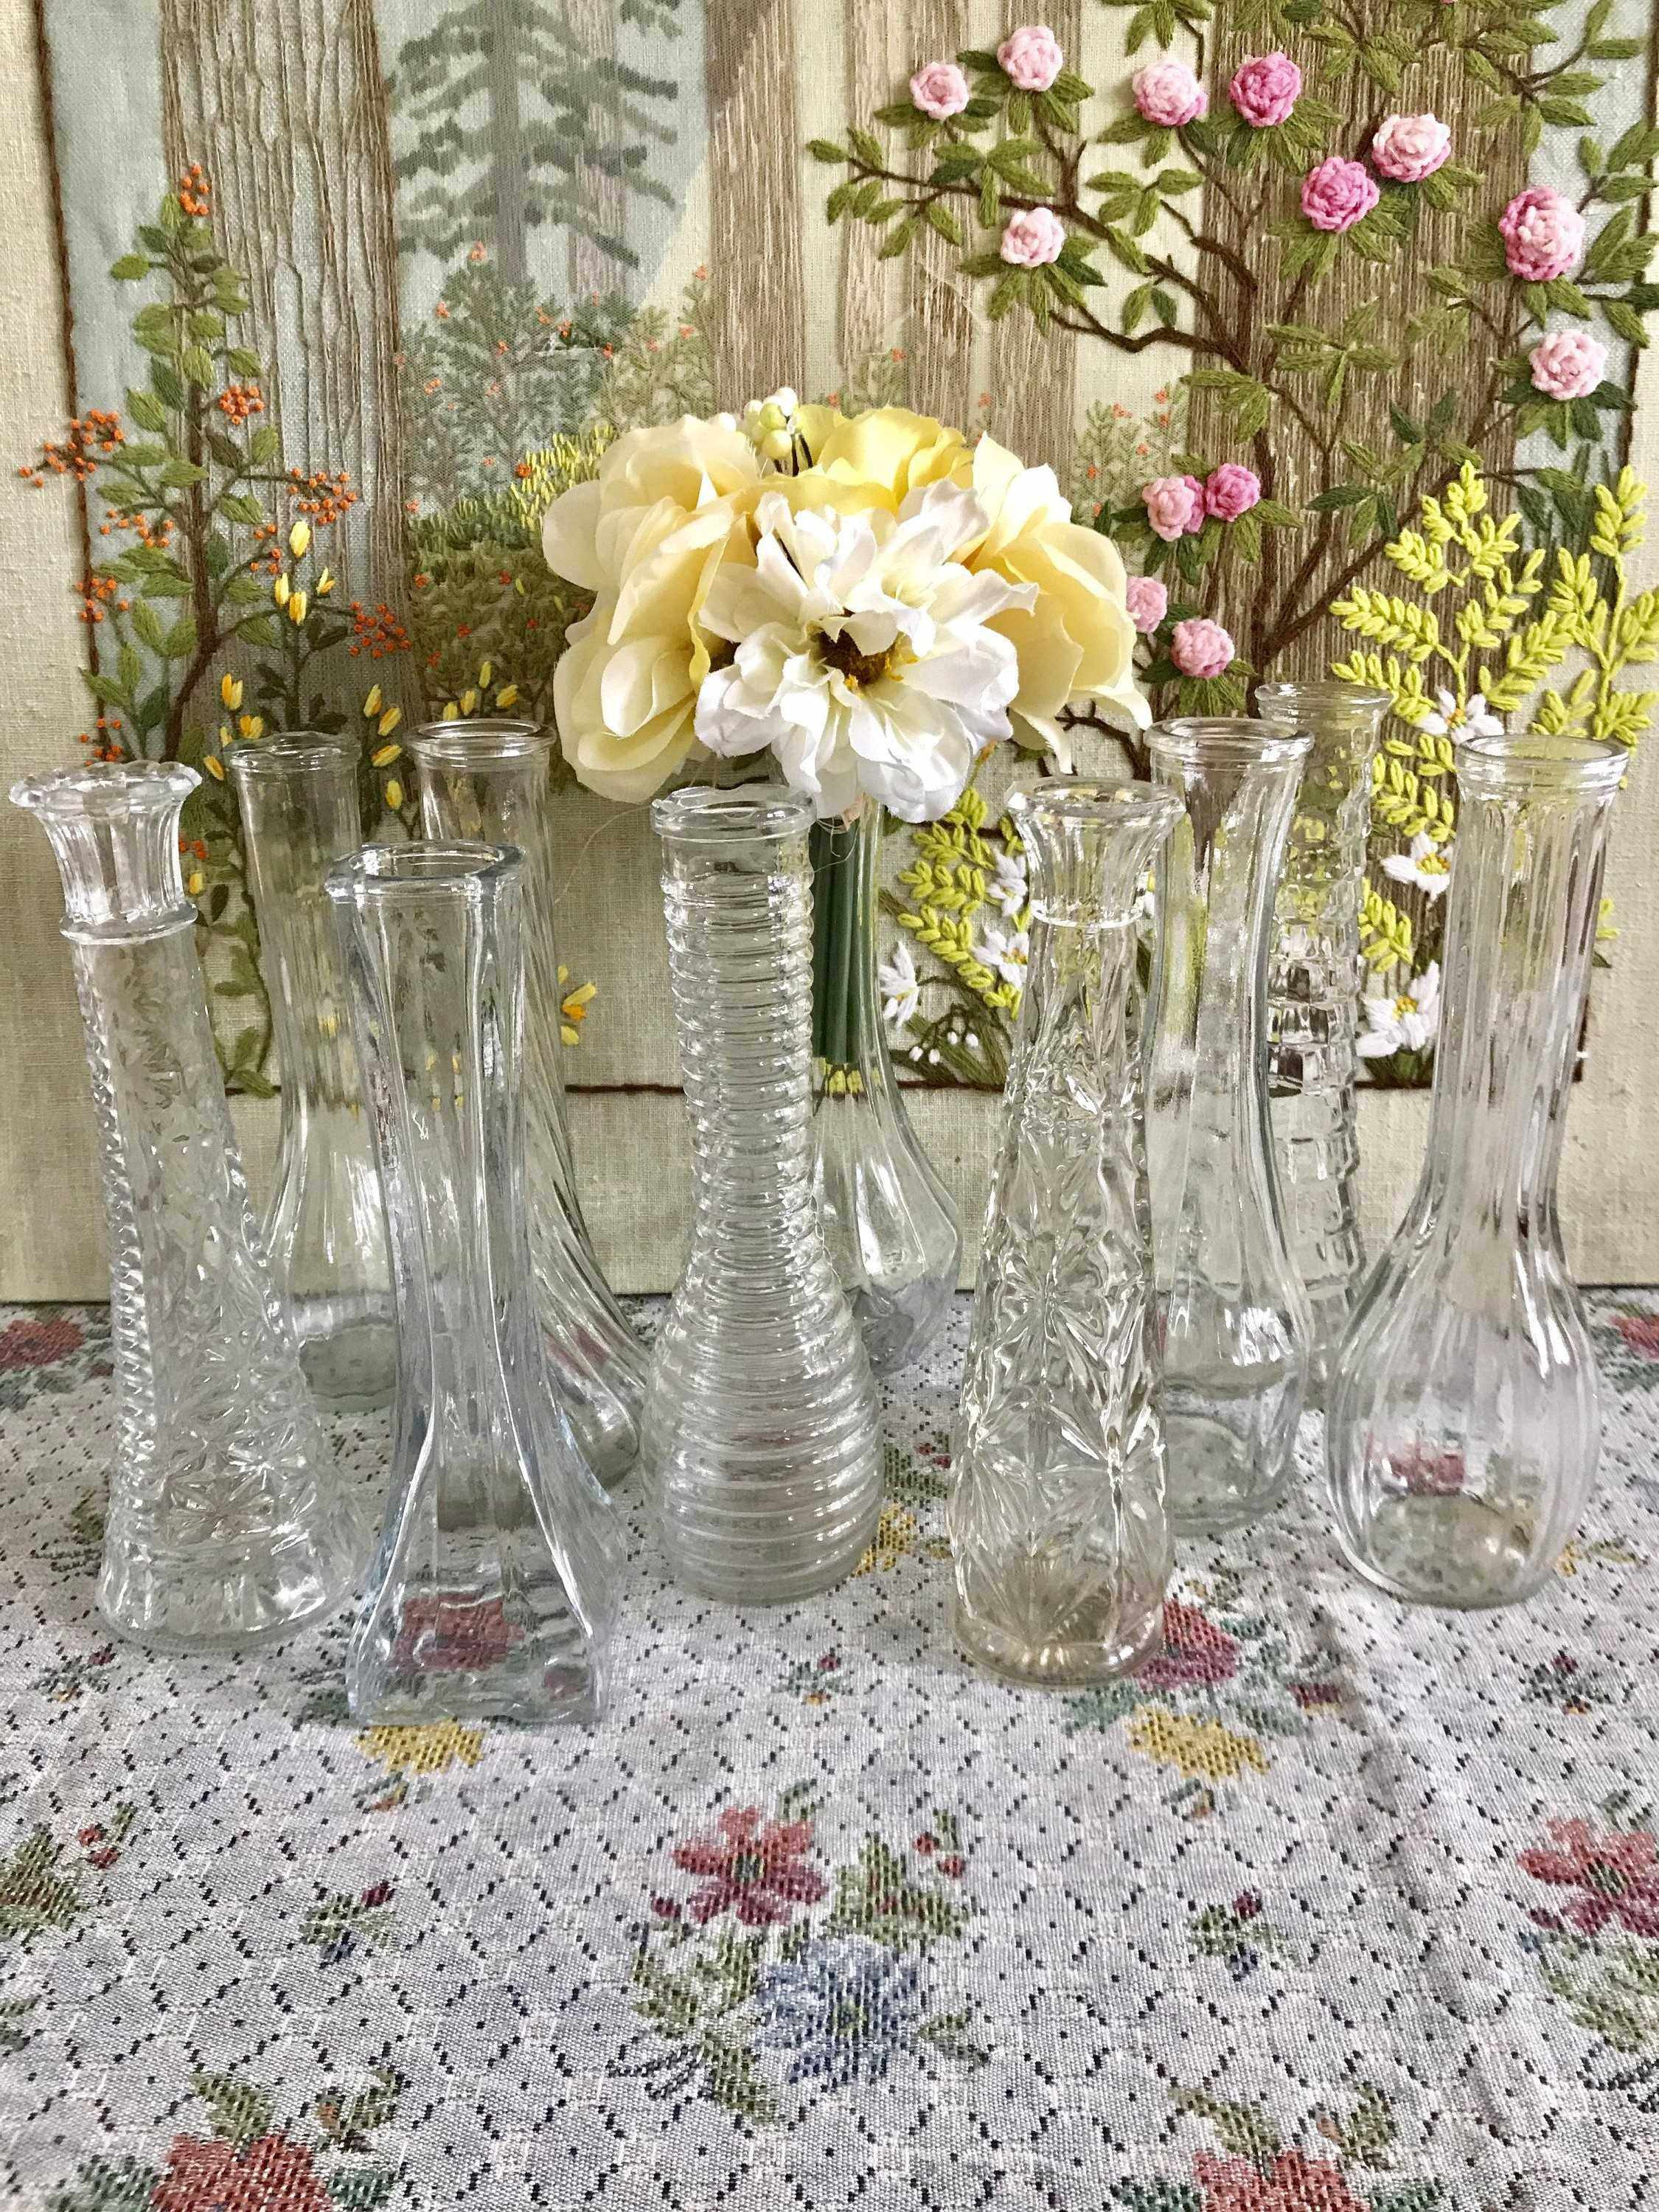 30 Famous Glass Vases for Weddings 2024 free download glass vases for weddings of cheap wedding decorations for tables awesome living room vases with regard to cheap wedding decorations for tables awesome living room vases wedding inspirational